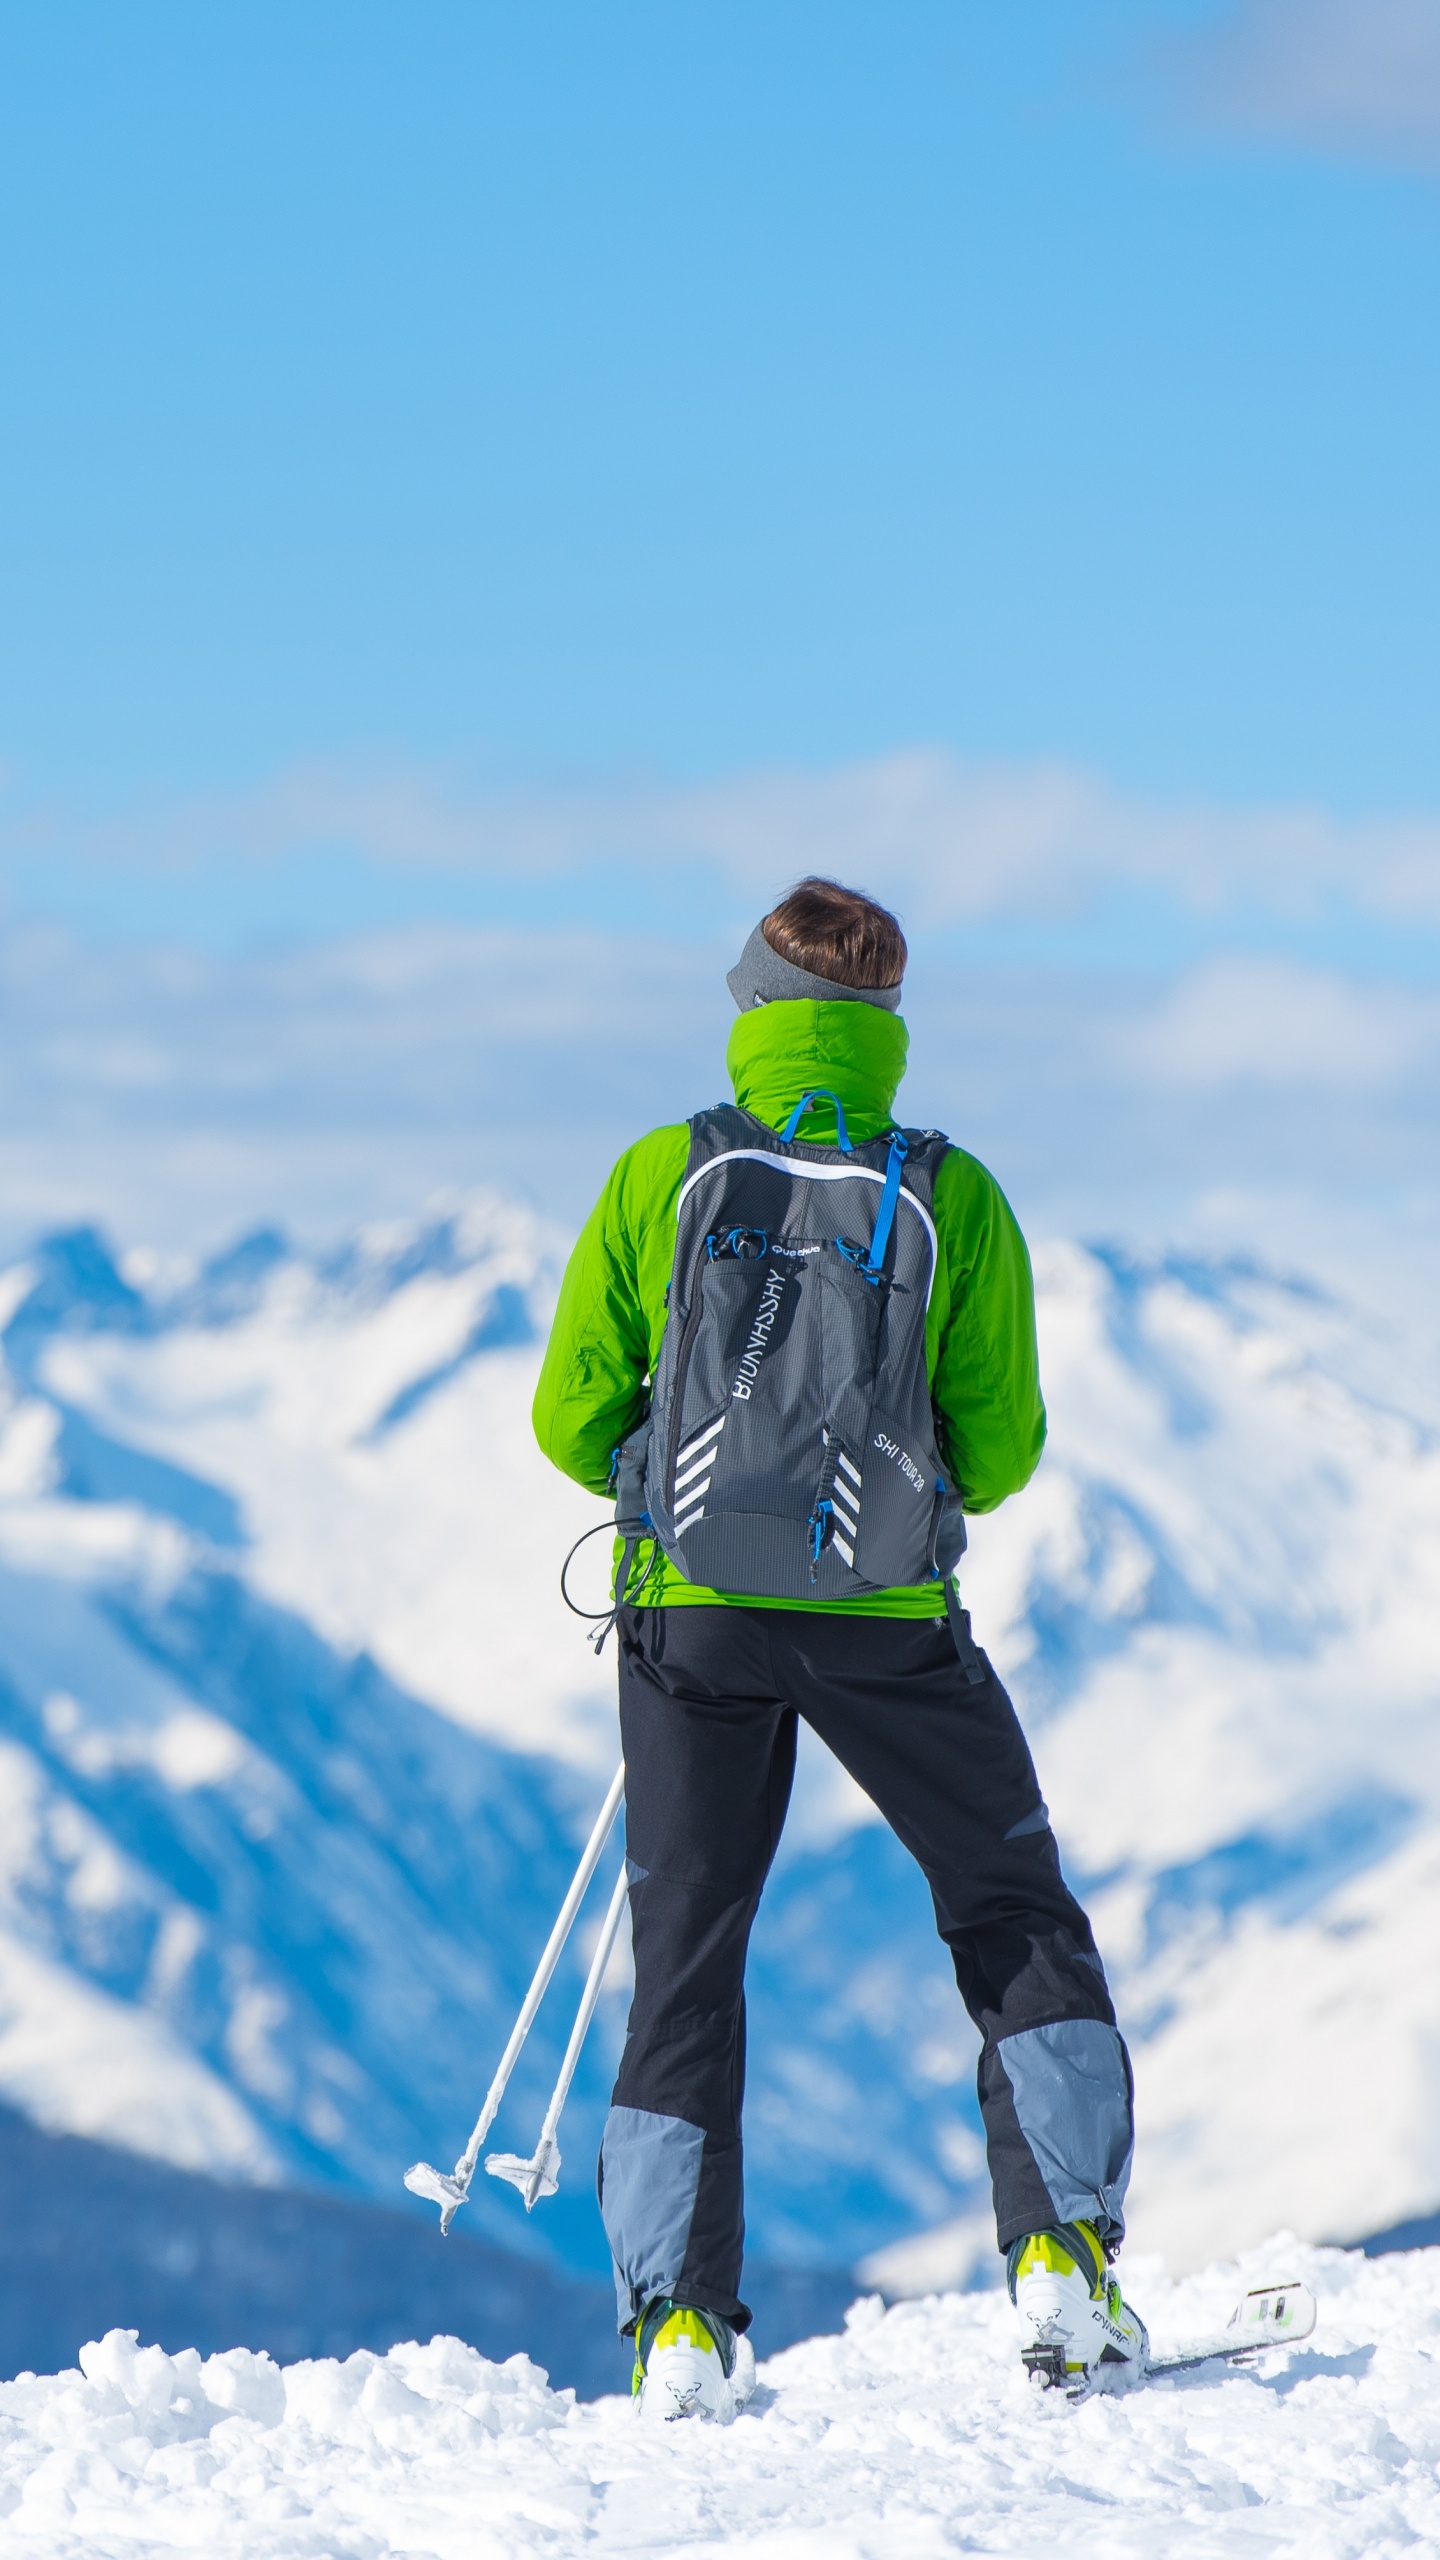 Man in Green Jacket and Black Pants Standing on Snow Covered Ground During Daytime. Wallpaper in 1440x2560 Resolution